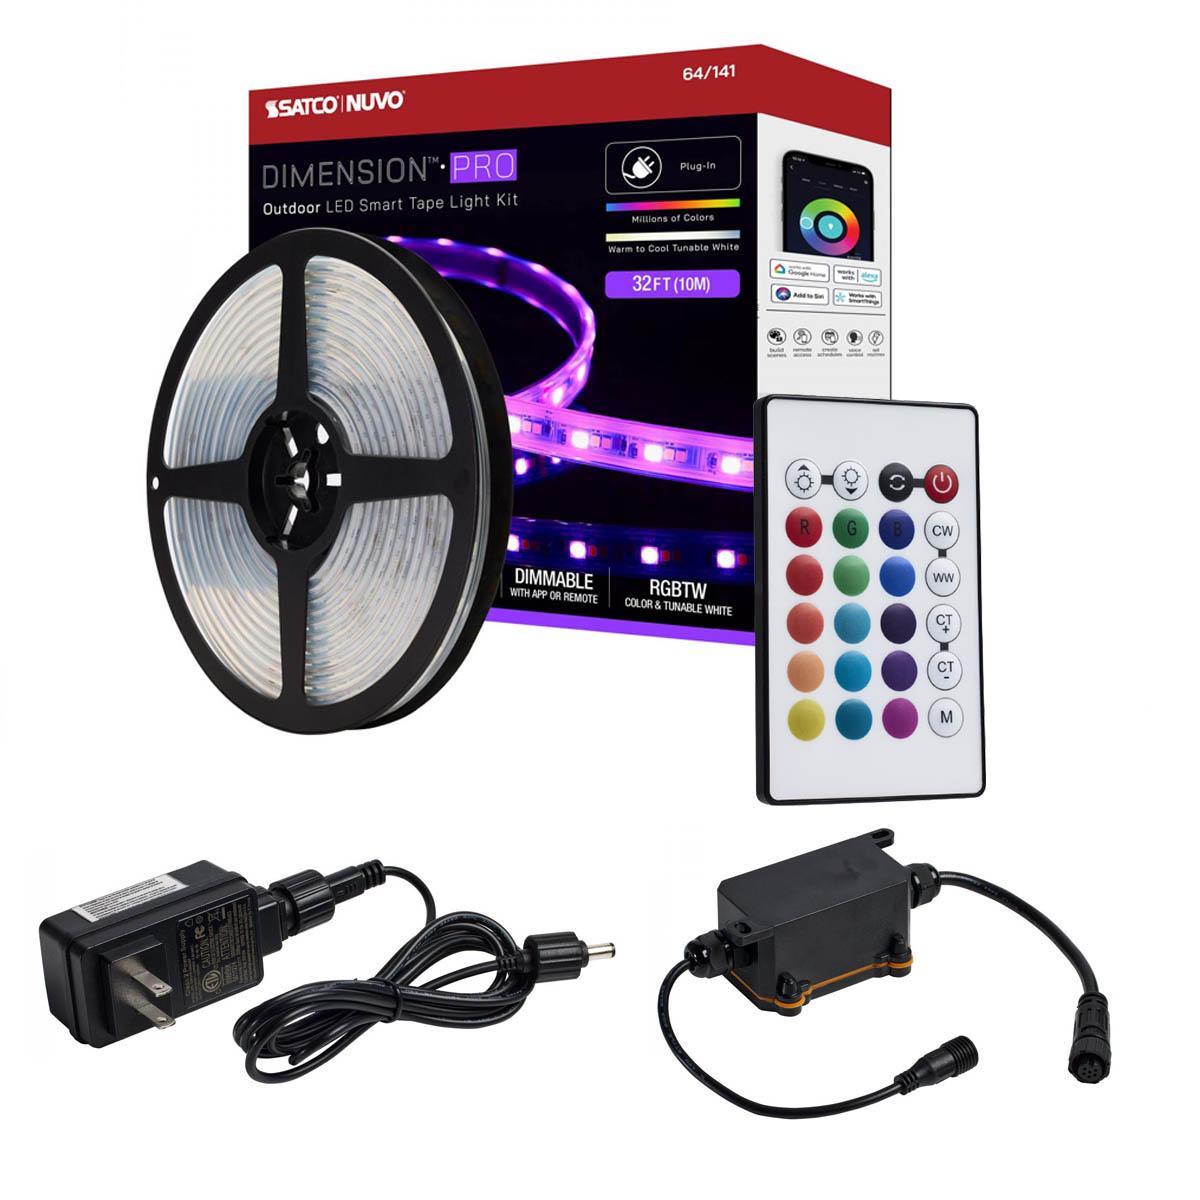 Dimension Pro Outdoor Smart LED Tape Light Kit with Remote, 32ft Reel, Color Changing RGB and Tunable White, 24V, Plug Connection